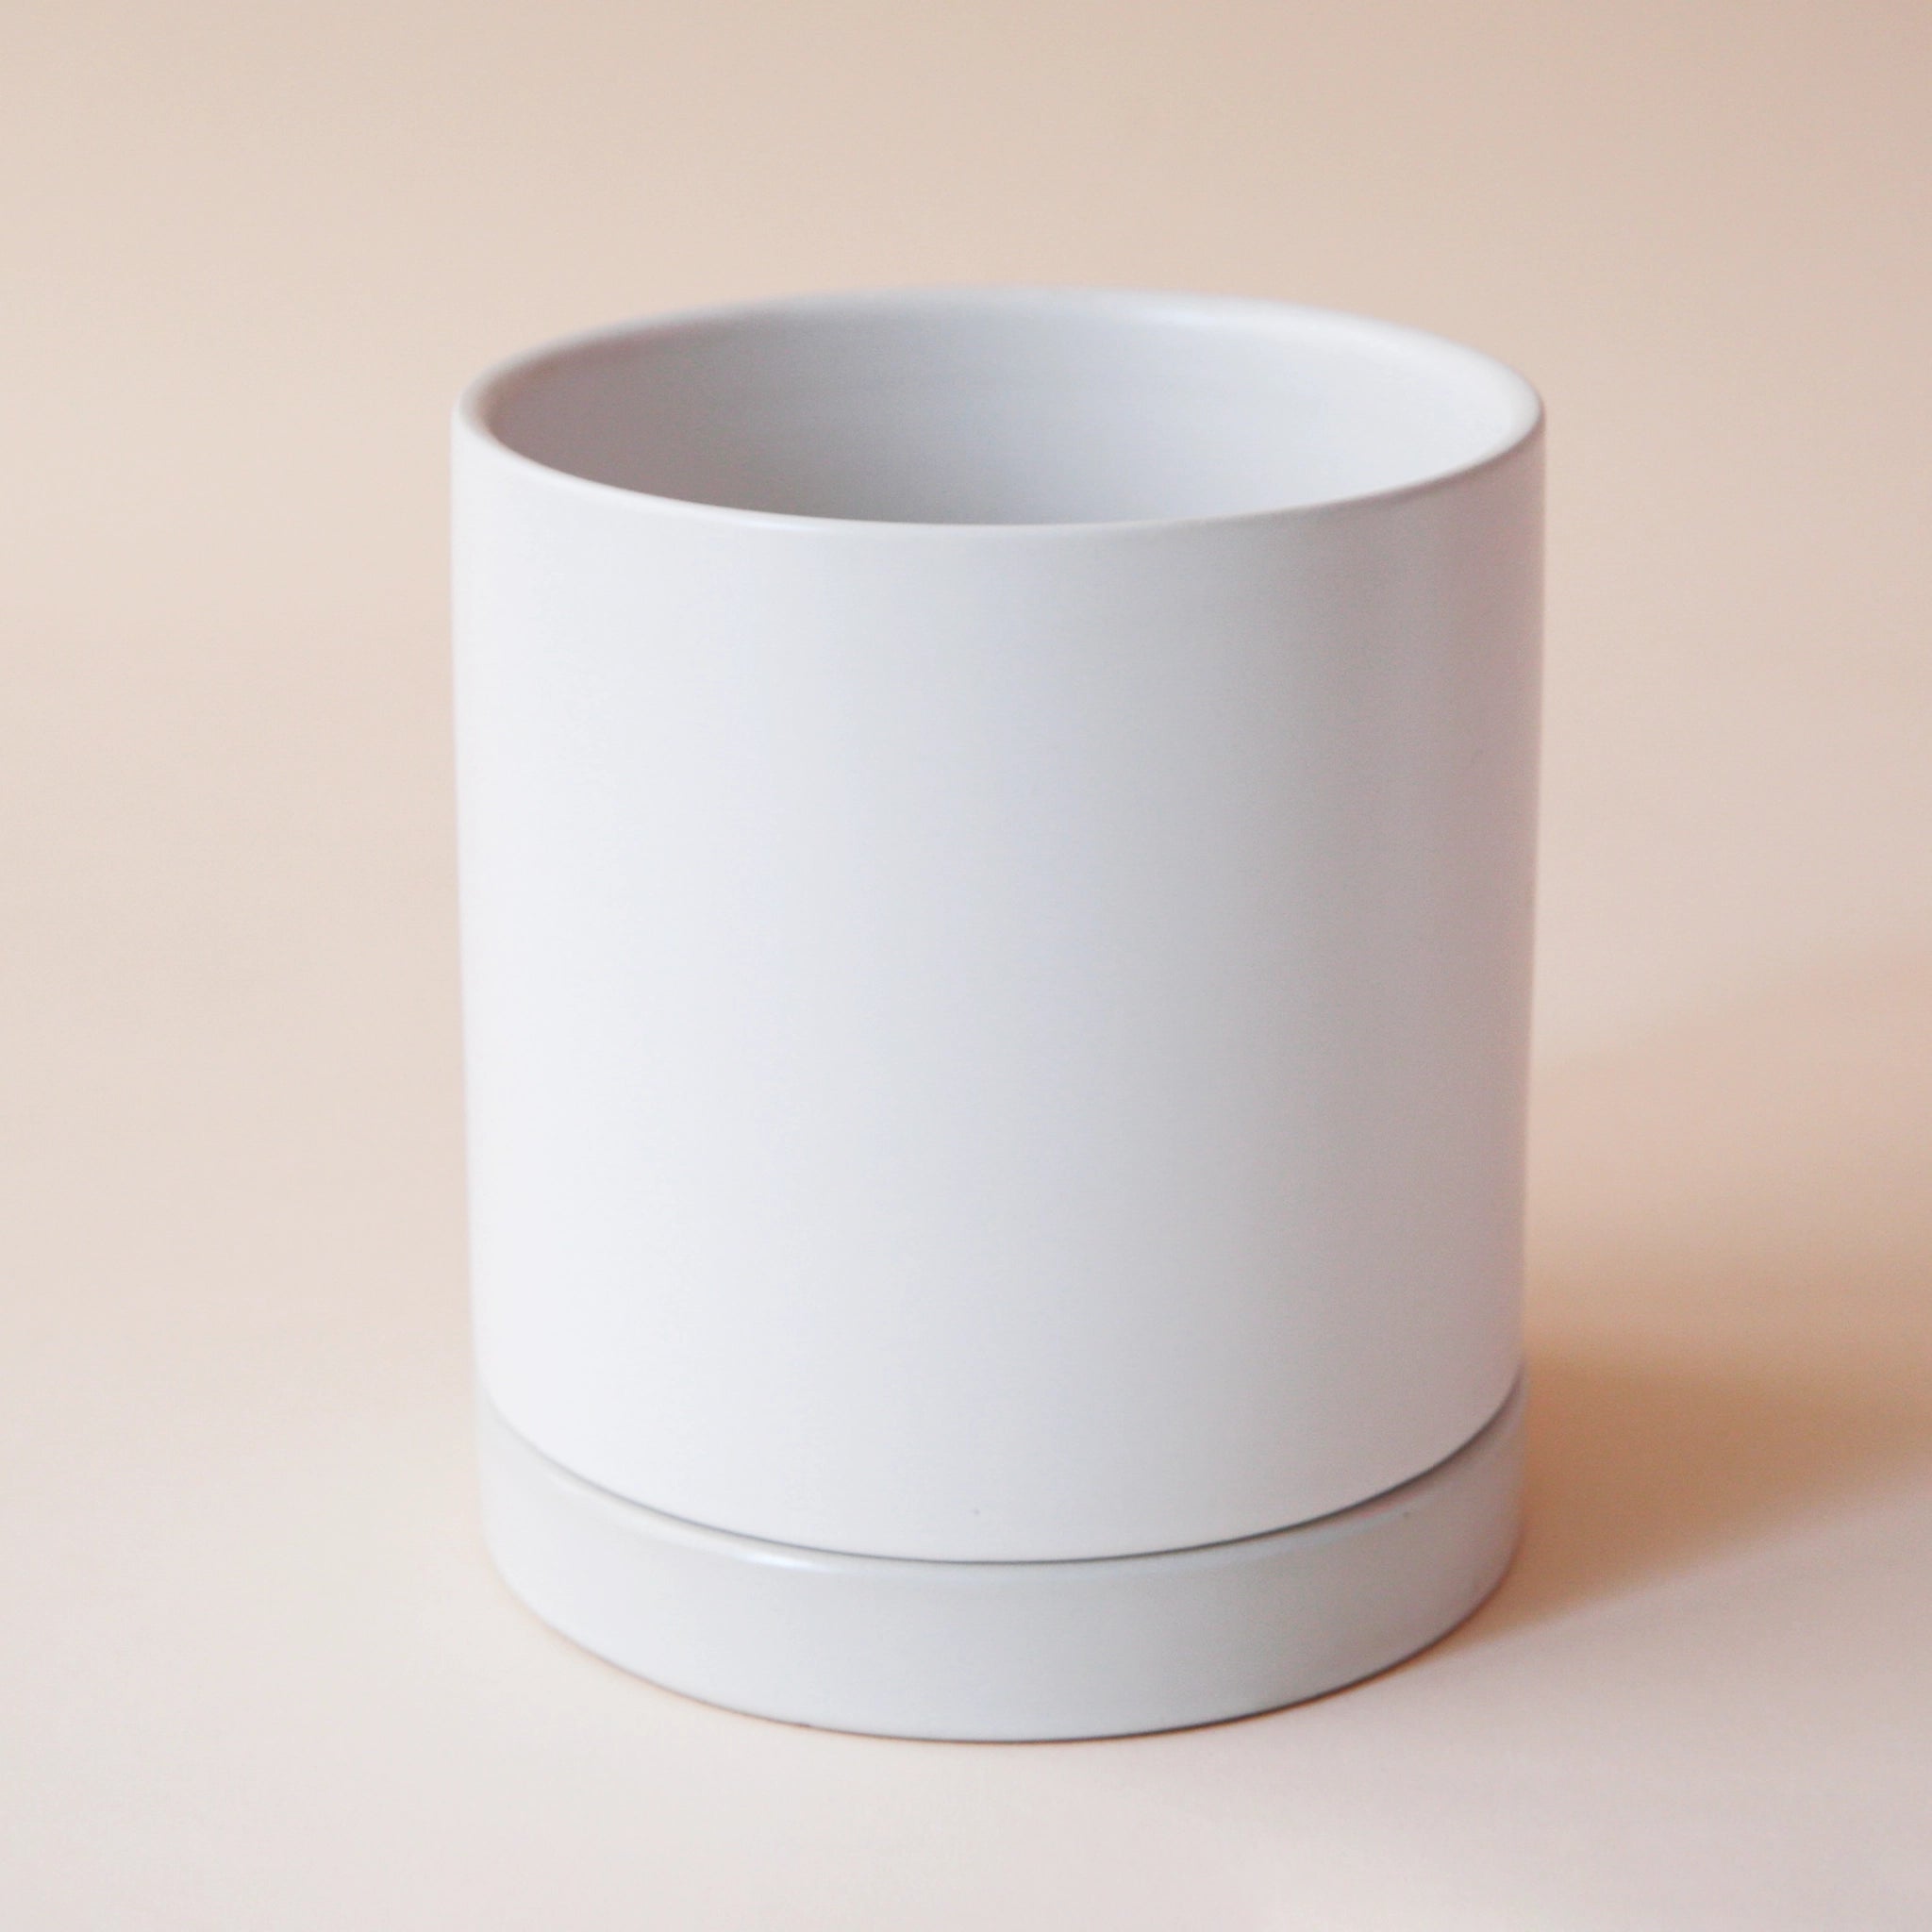 simple white cylindrical pot with matching saucer